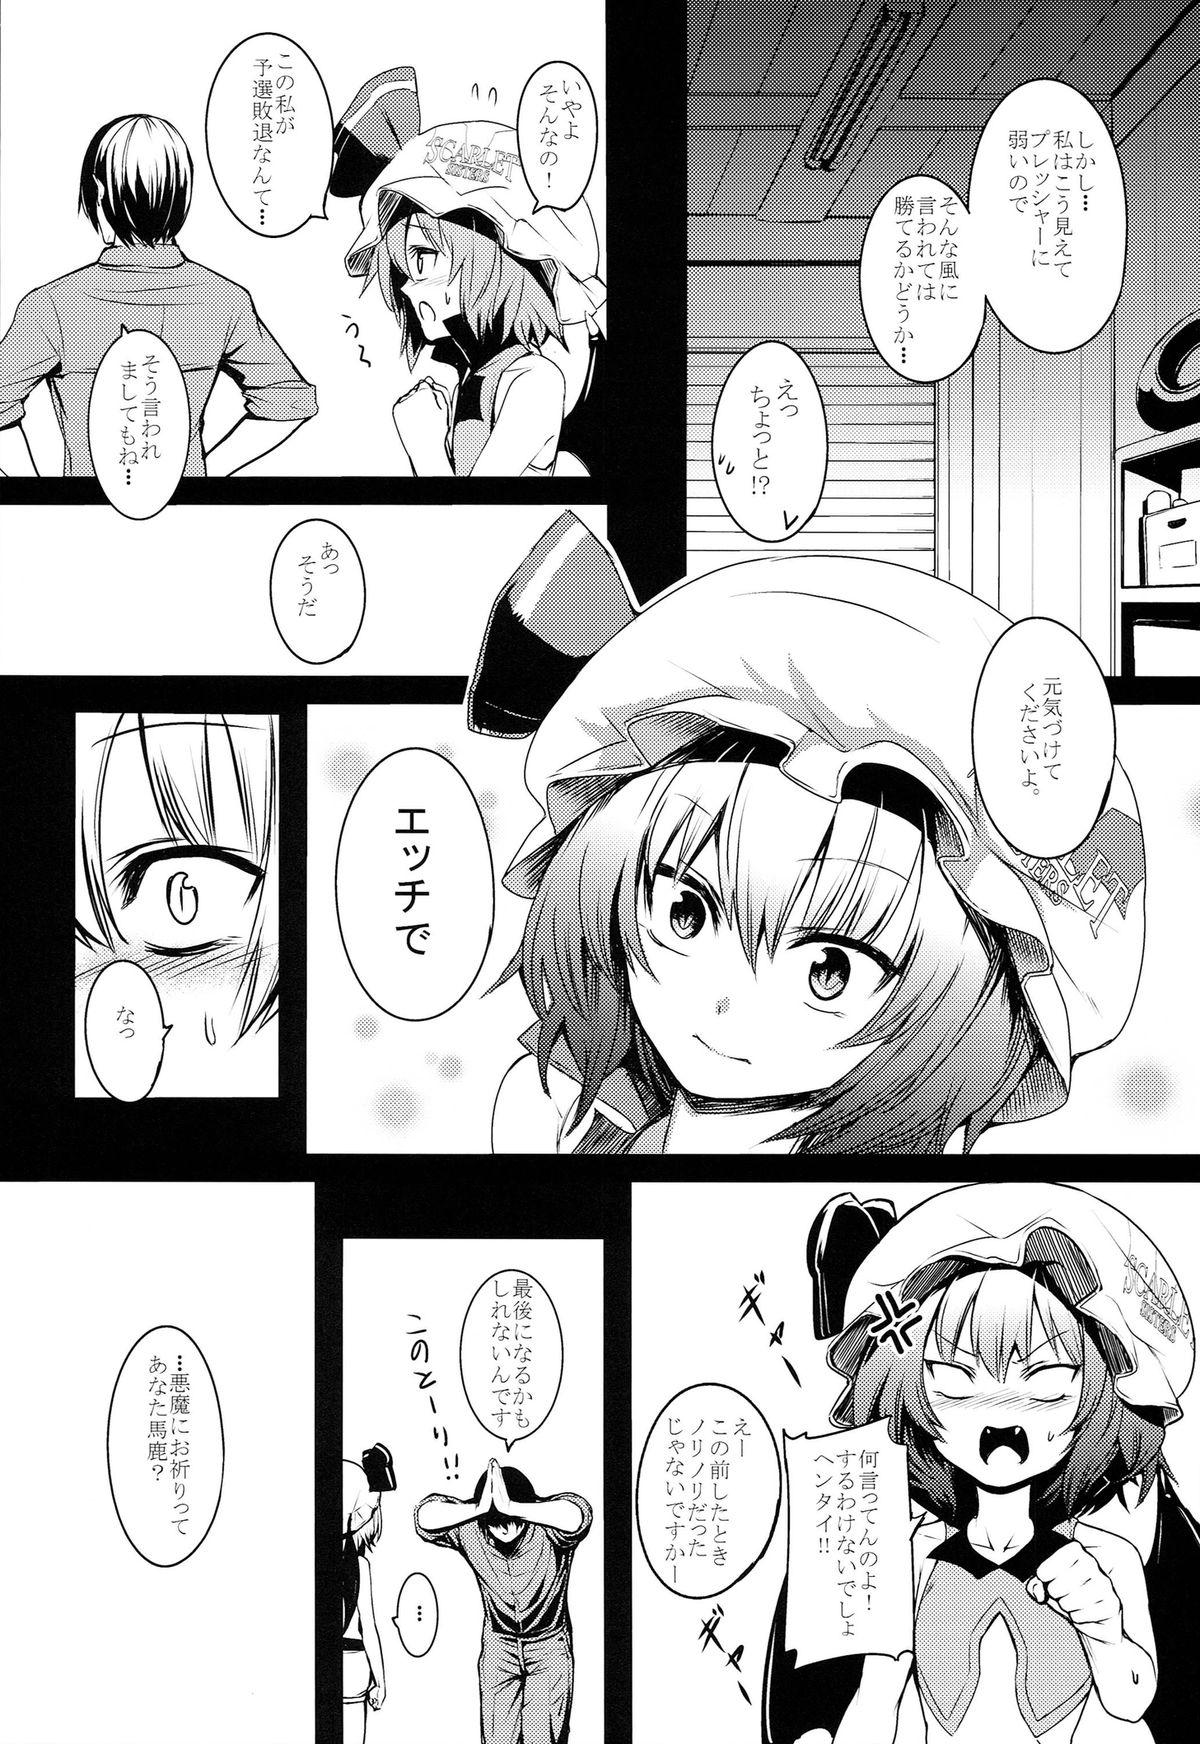 Viet TOUHOU RACE QUEENS COLLABO CLUB - Touhou project Cams - Page 5